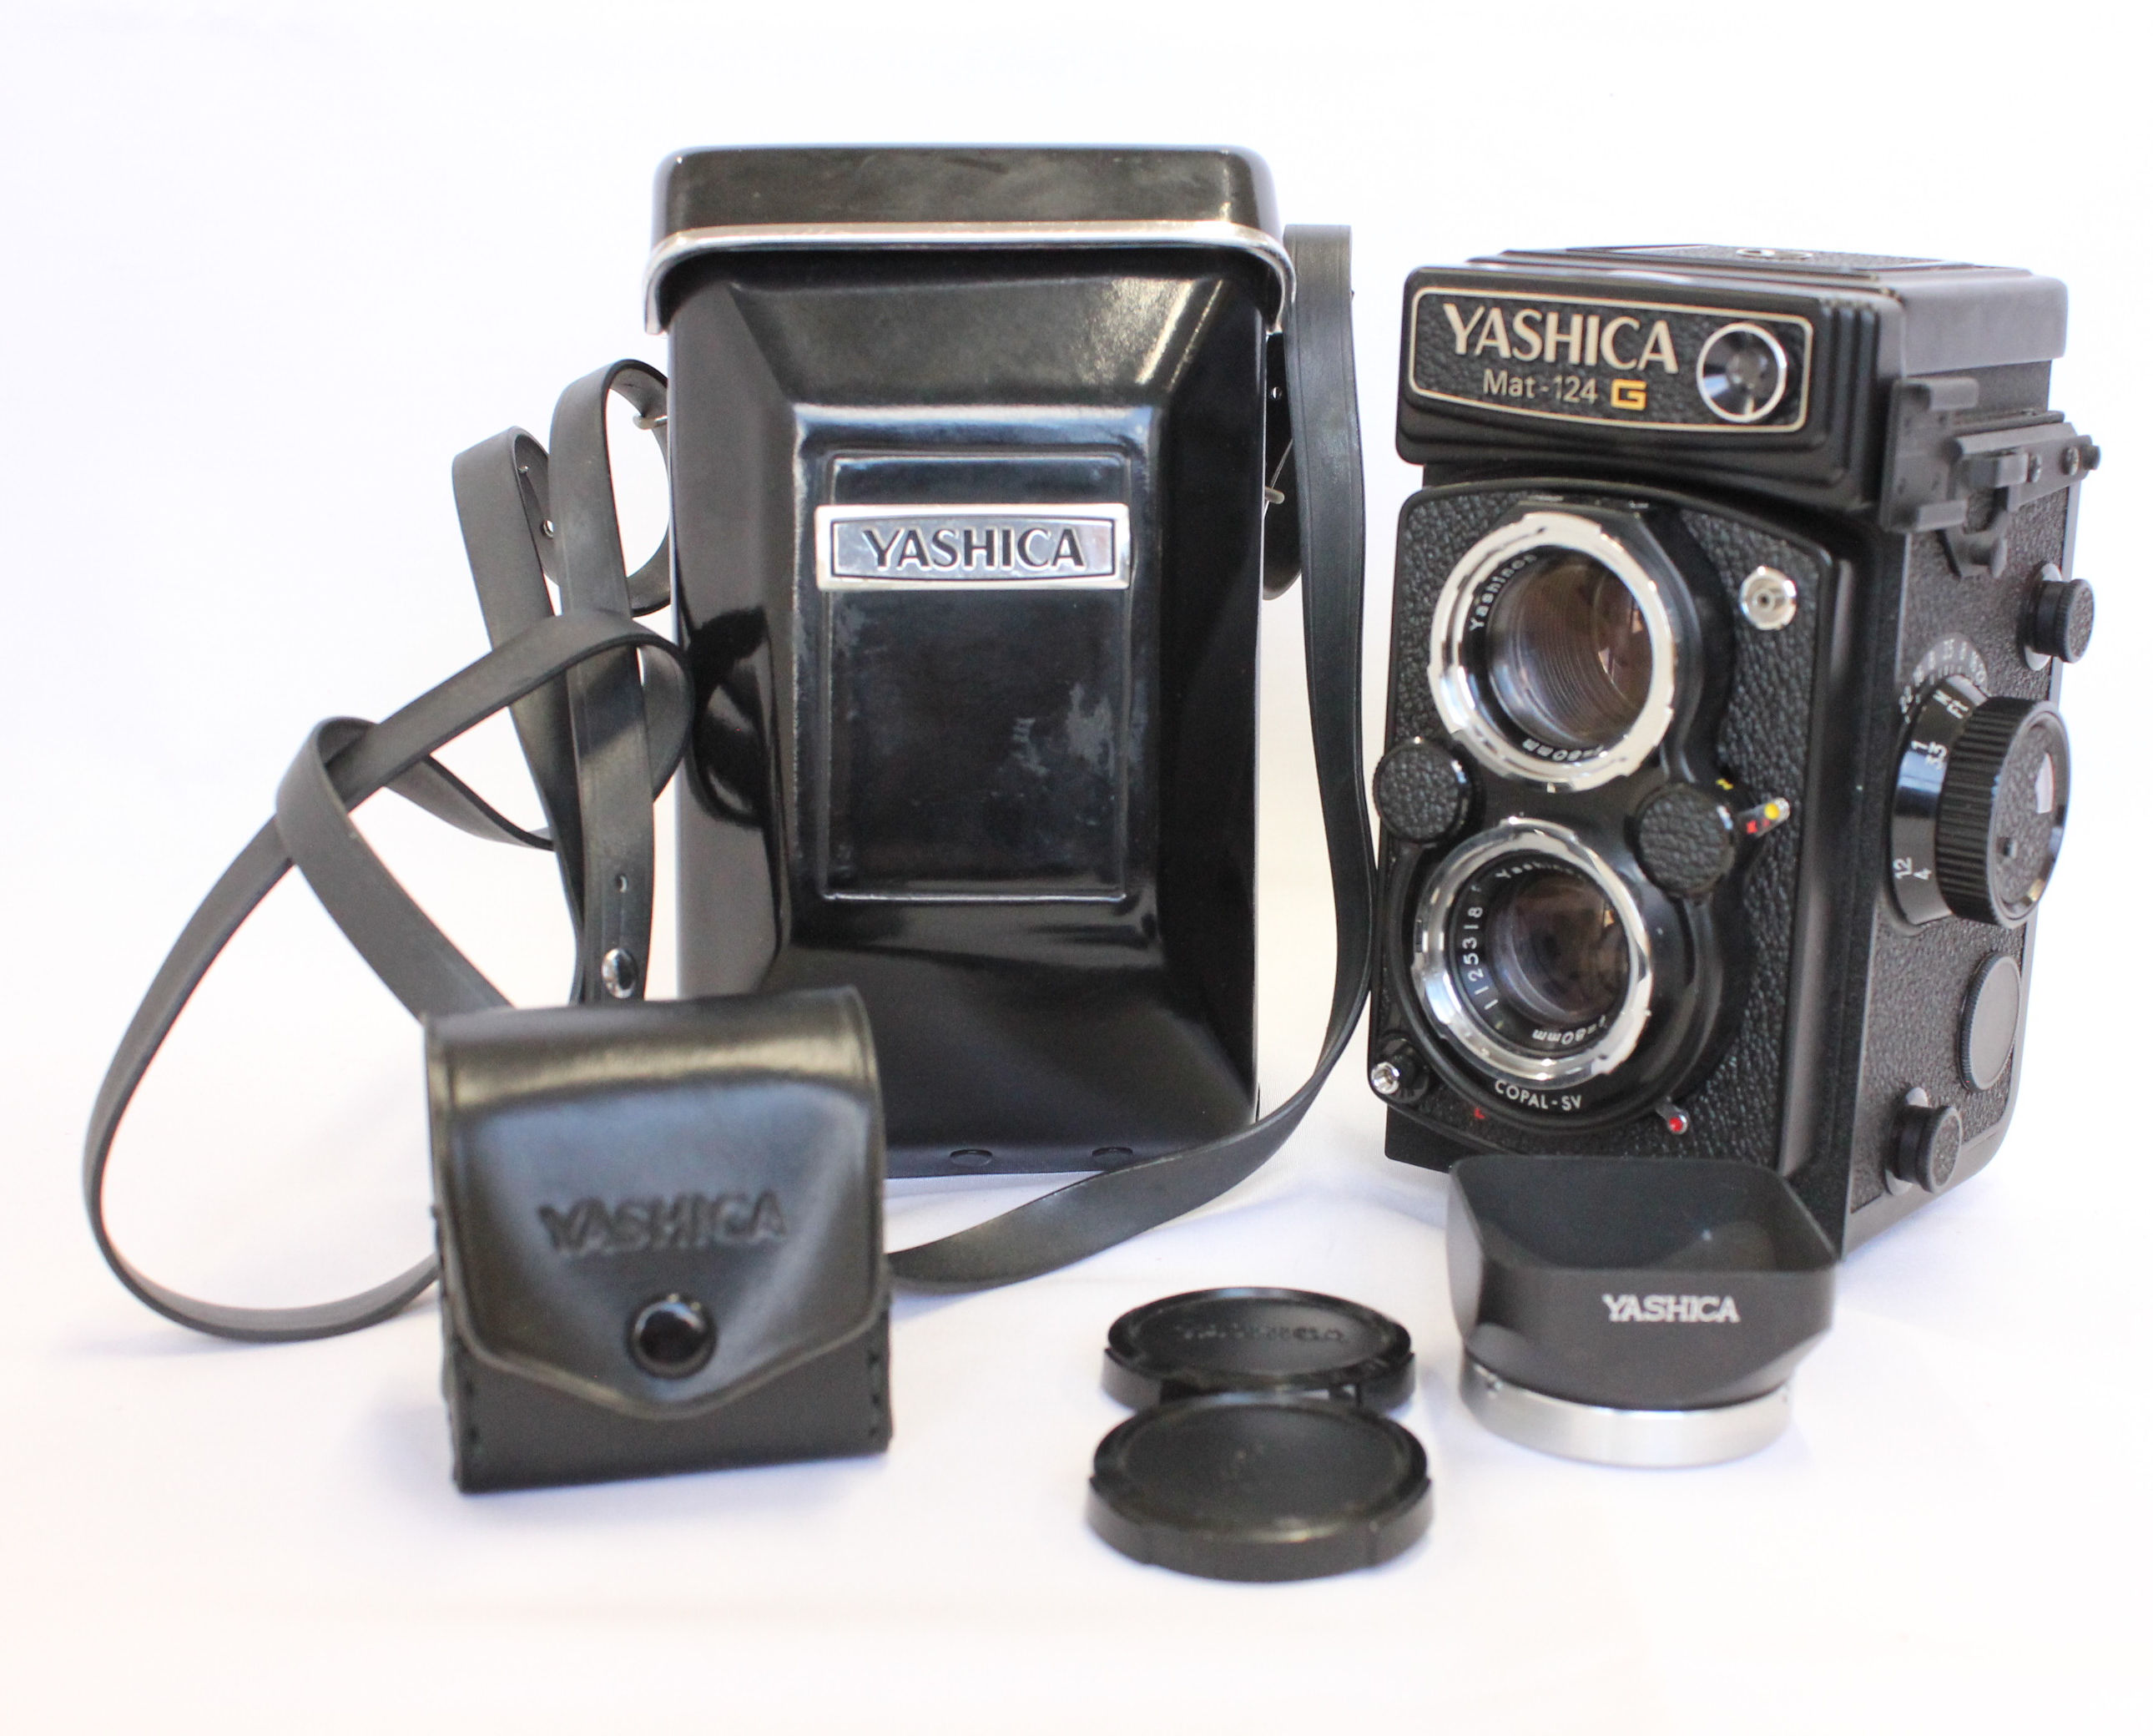 [Top Mint] YASHICA MAT 124 G 6x6 TLR Medium Format Camera with 80mm F/3.5 Lens from Japan